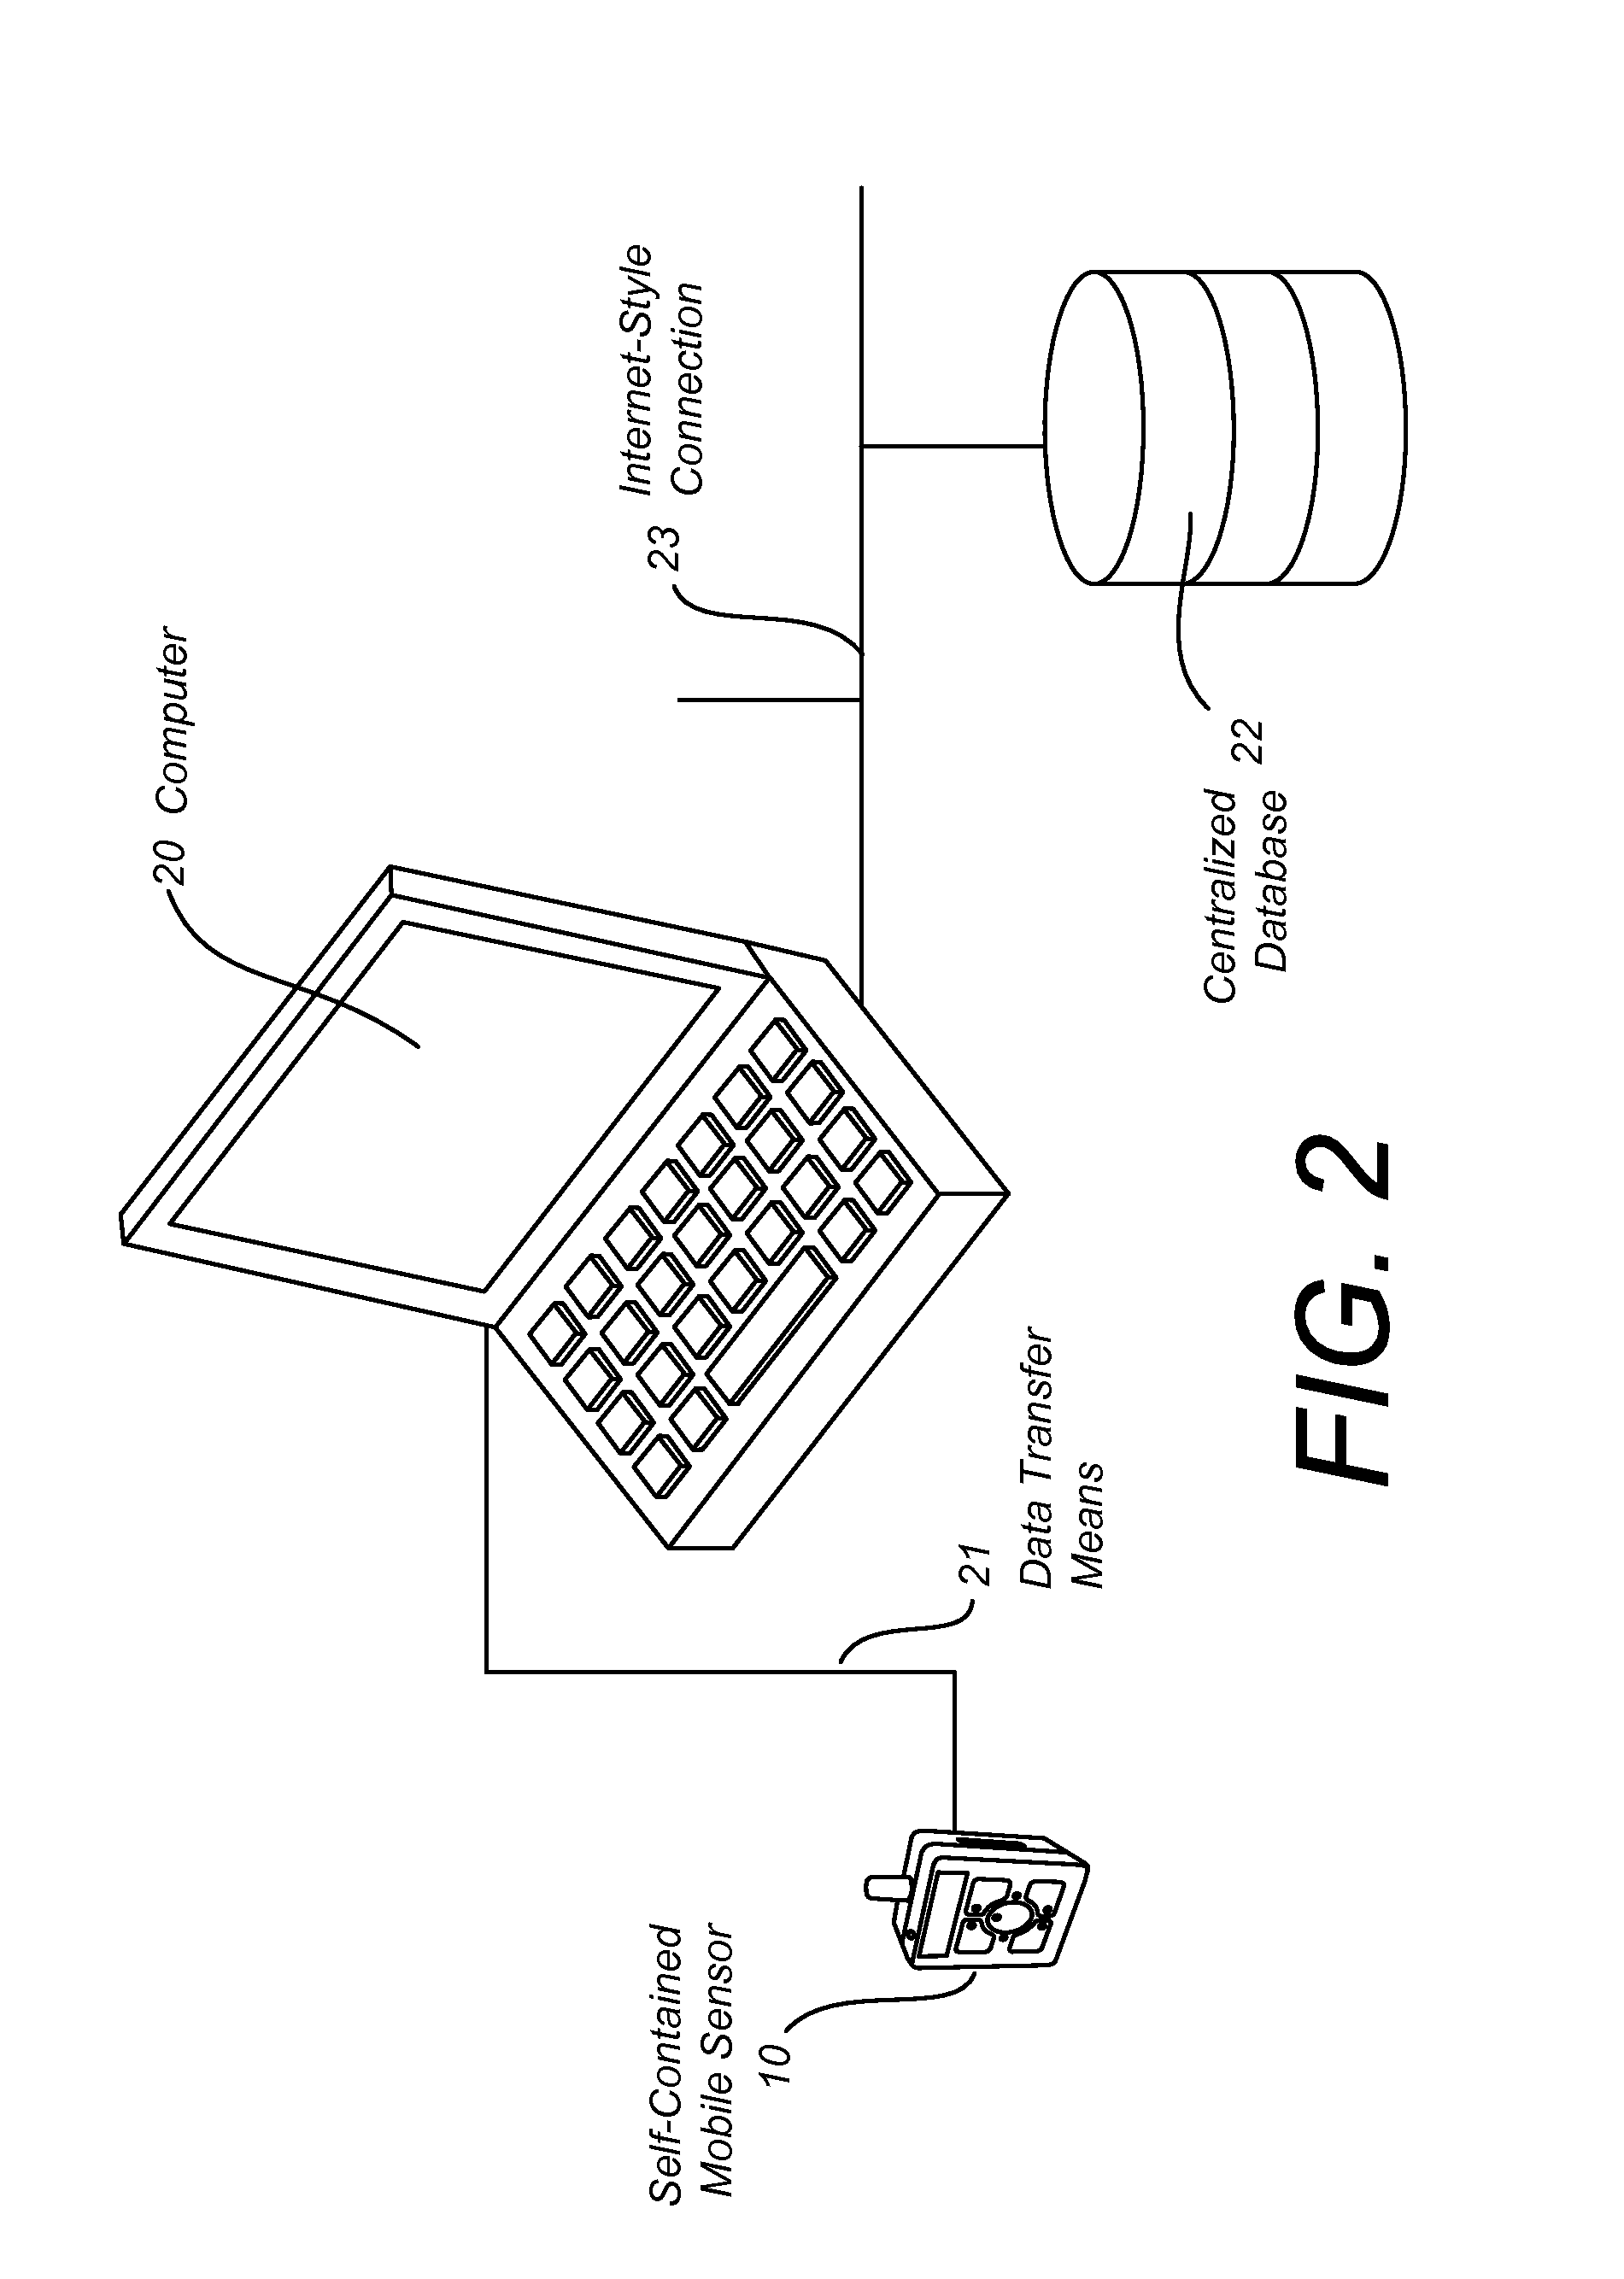 Synchronized video and synthetic visualization system and method